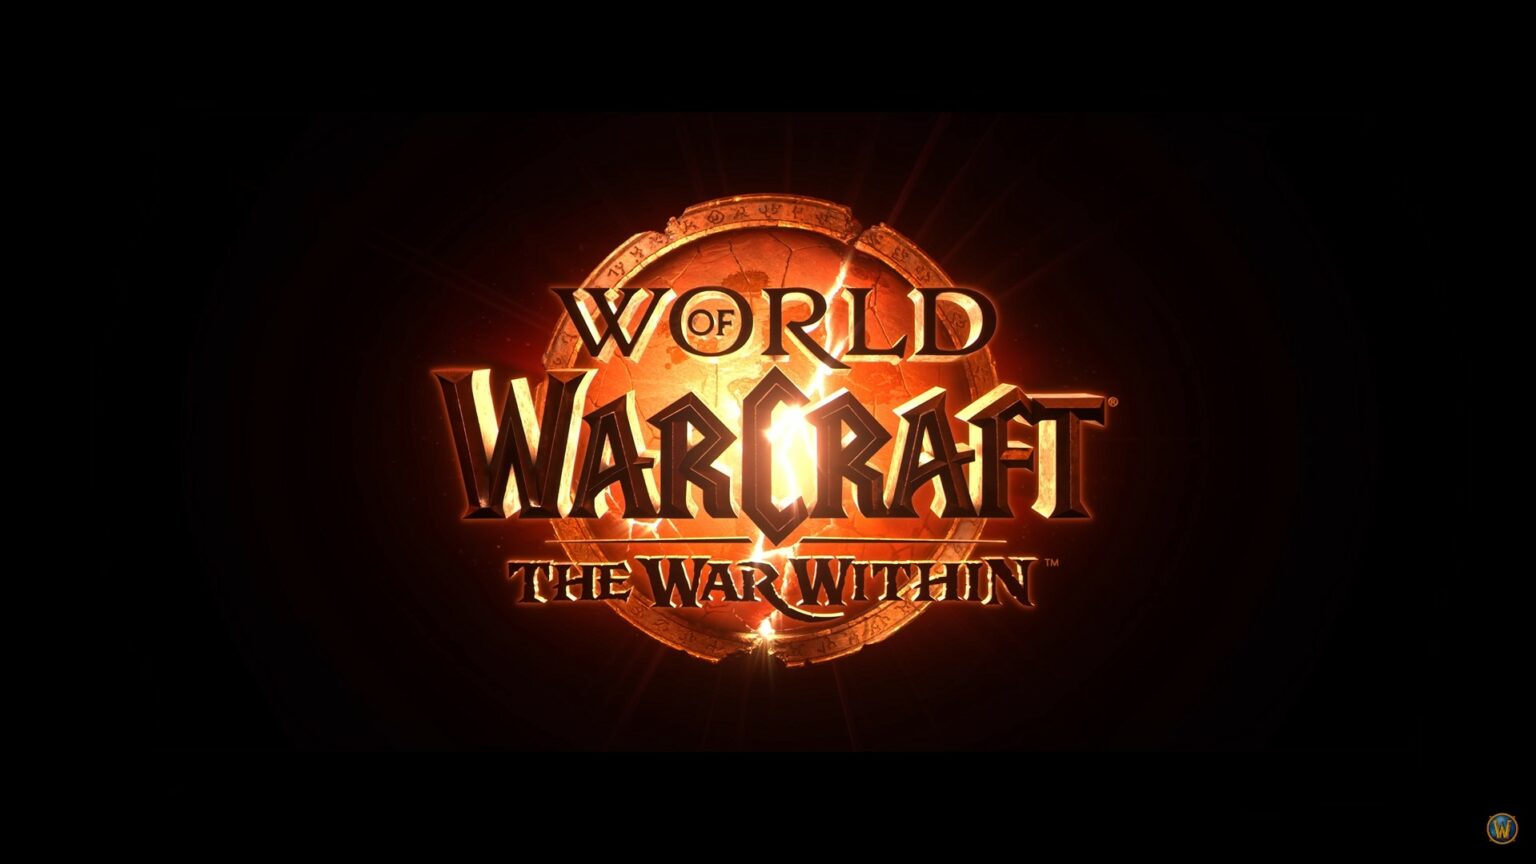 2024 WoW roadmap details path to The War Within launch ONE Esports